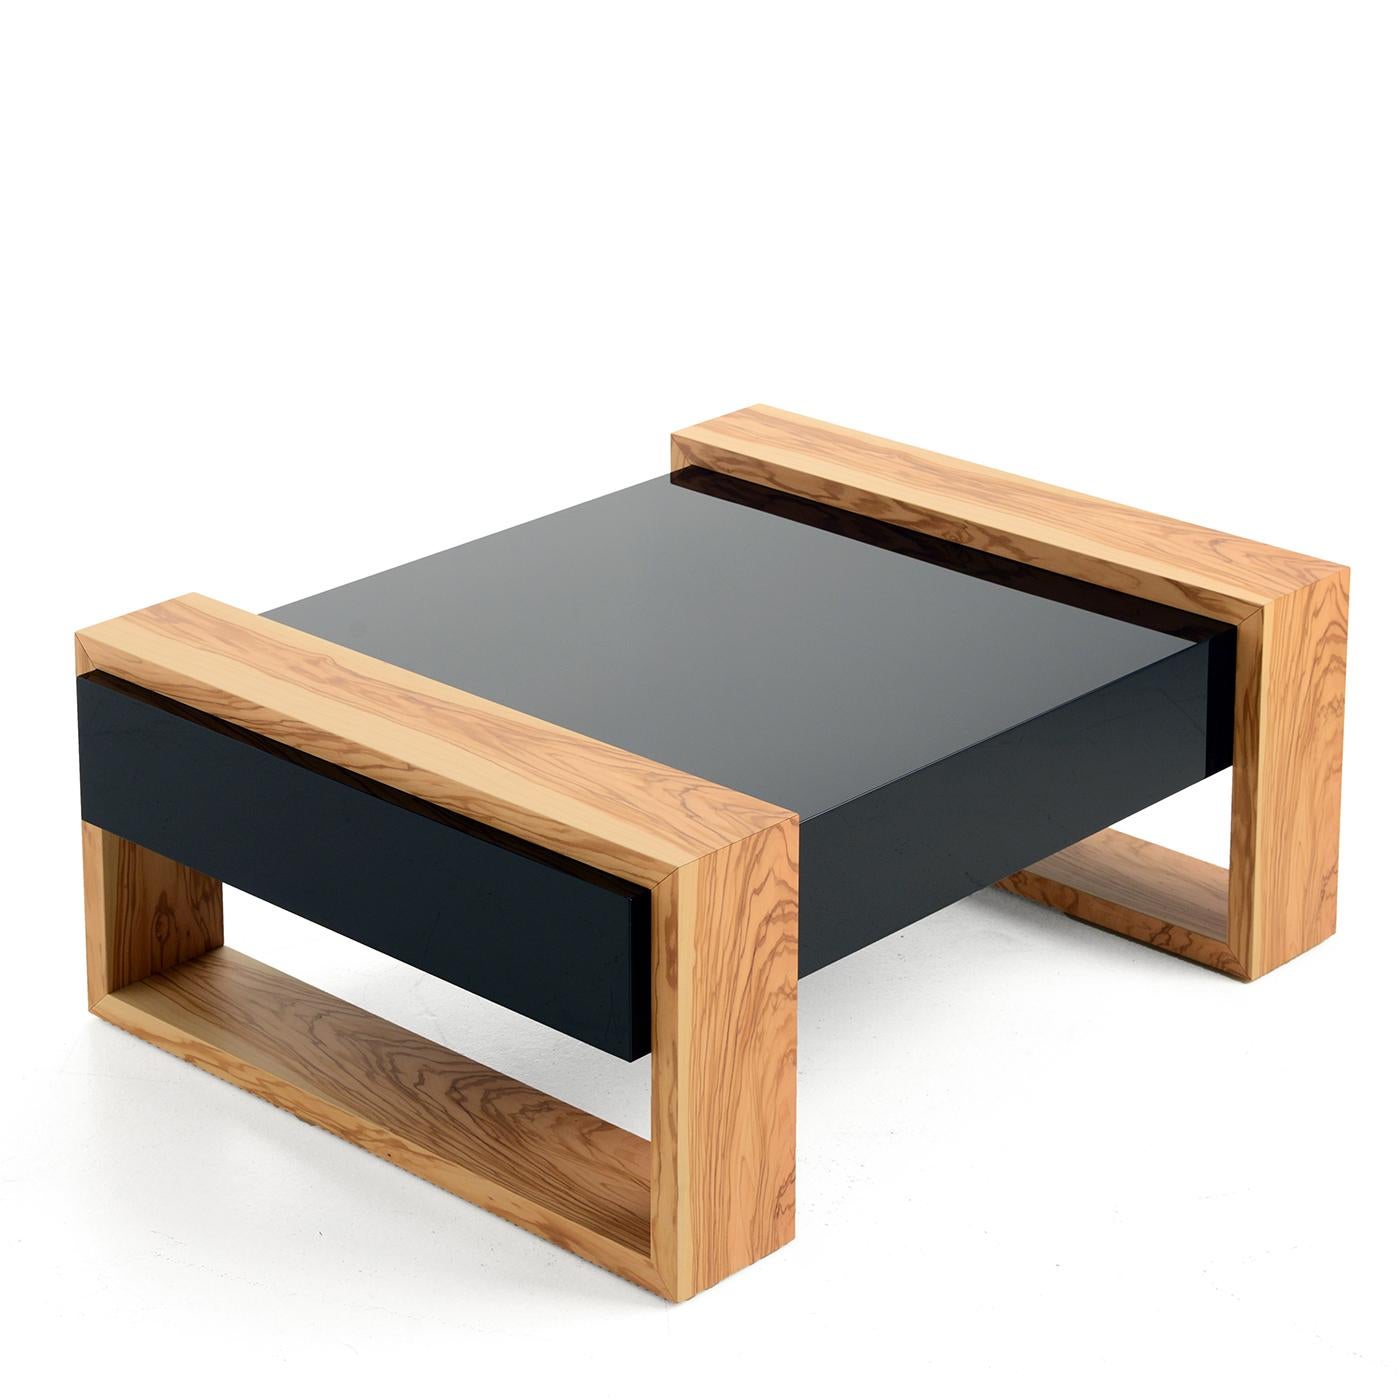 This low coffee table pays homage to the Italian region of Puglia, located in the heel of the country's heel. Its black paraban top represents the darkness of night, while its light olive wood structure symbolizes olive trees glistening under the